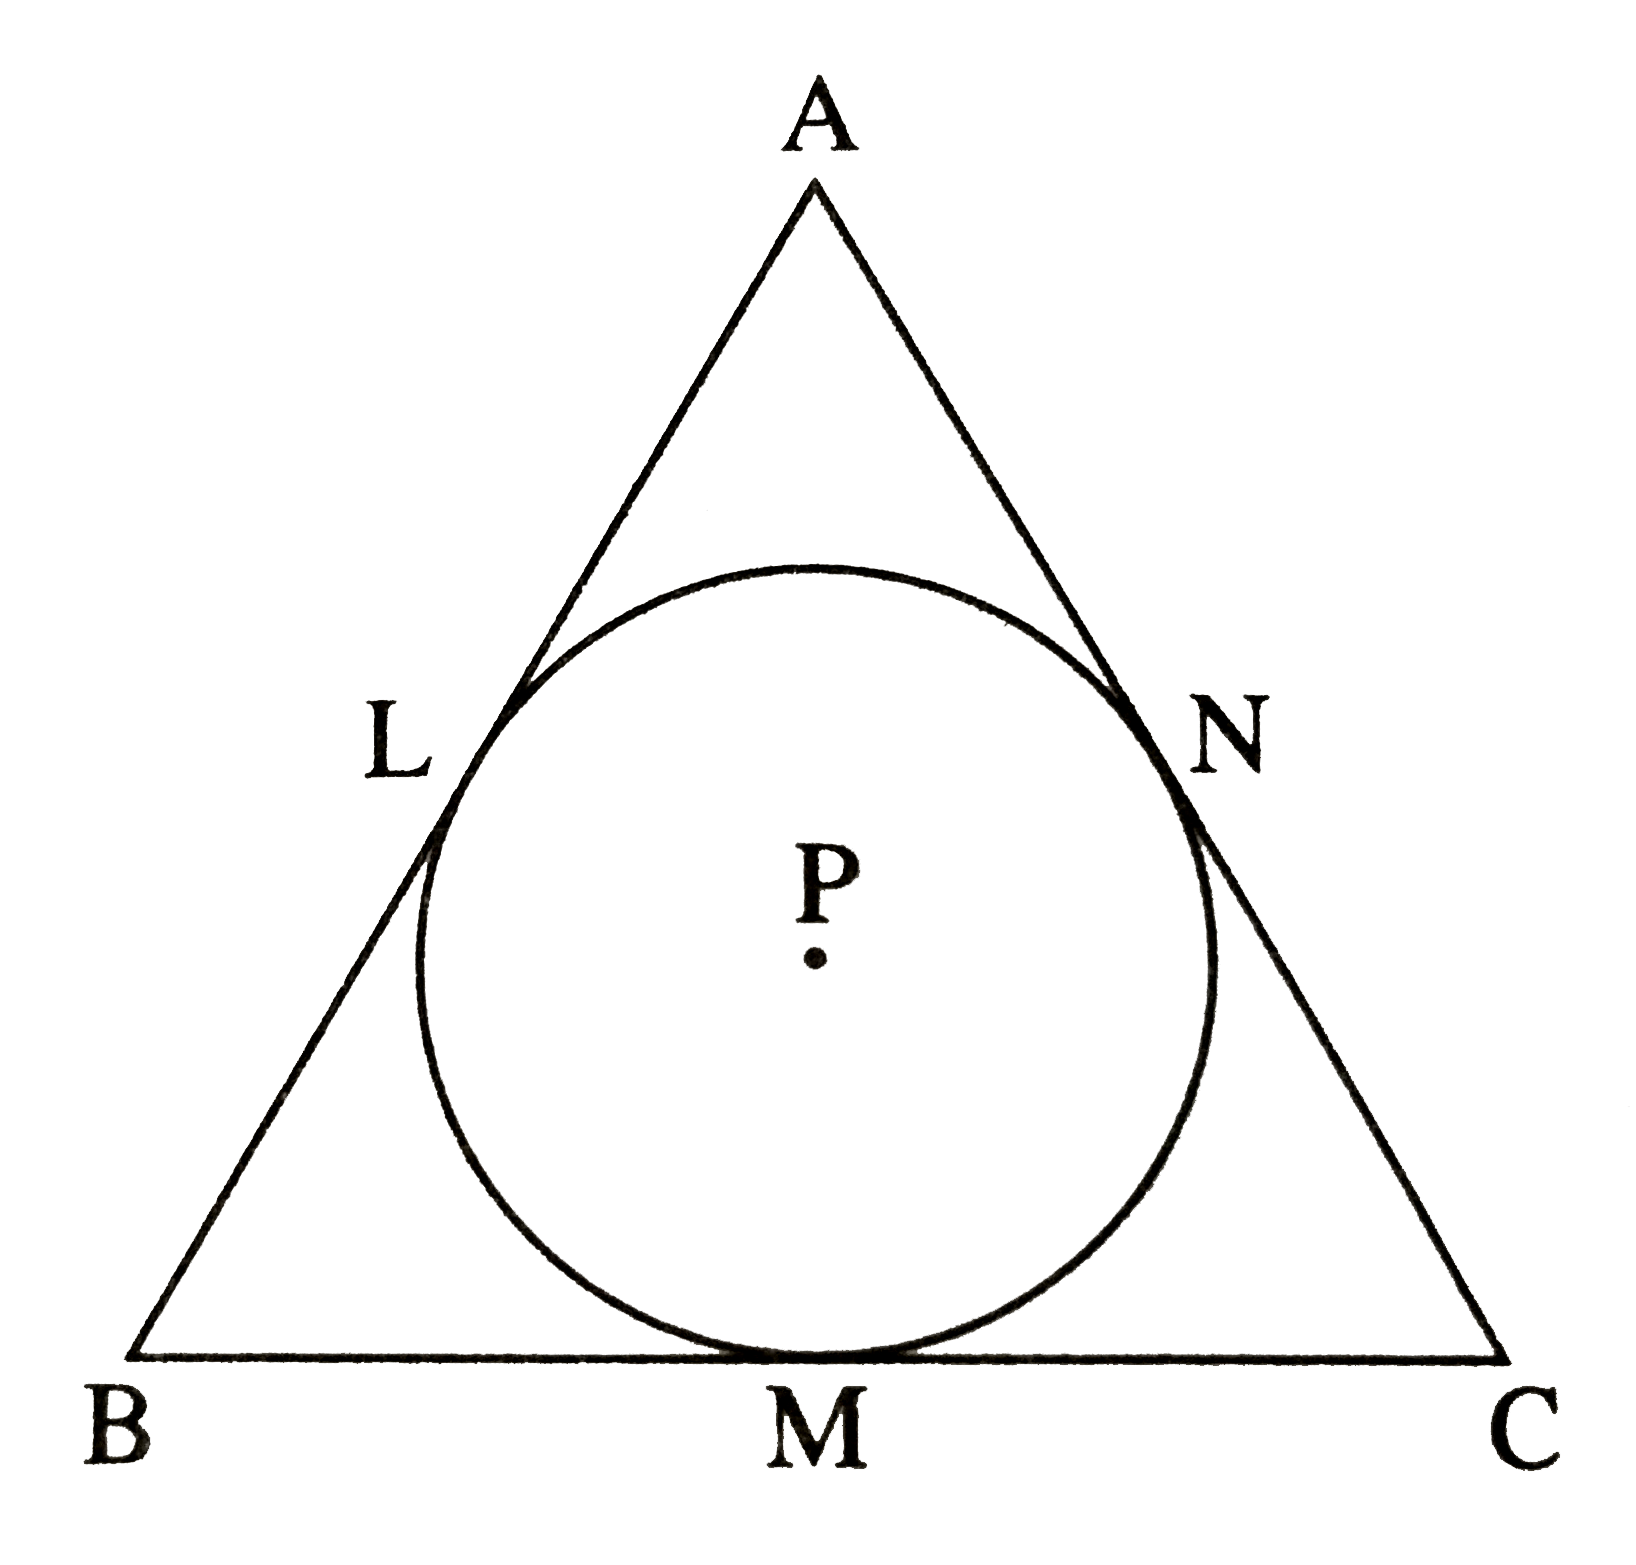 A circle with centre P is inscribed in the triangle ABC. Side AB, side BC and side AC touch the circle at points L,M and N respectively. Radius of the circle is r. Prove that: A( triangle ABC)=(1)/(2)(AB+BC+AC)xxr.